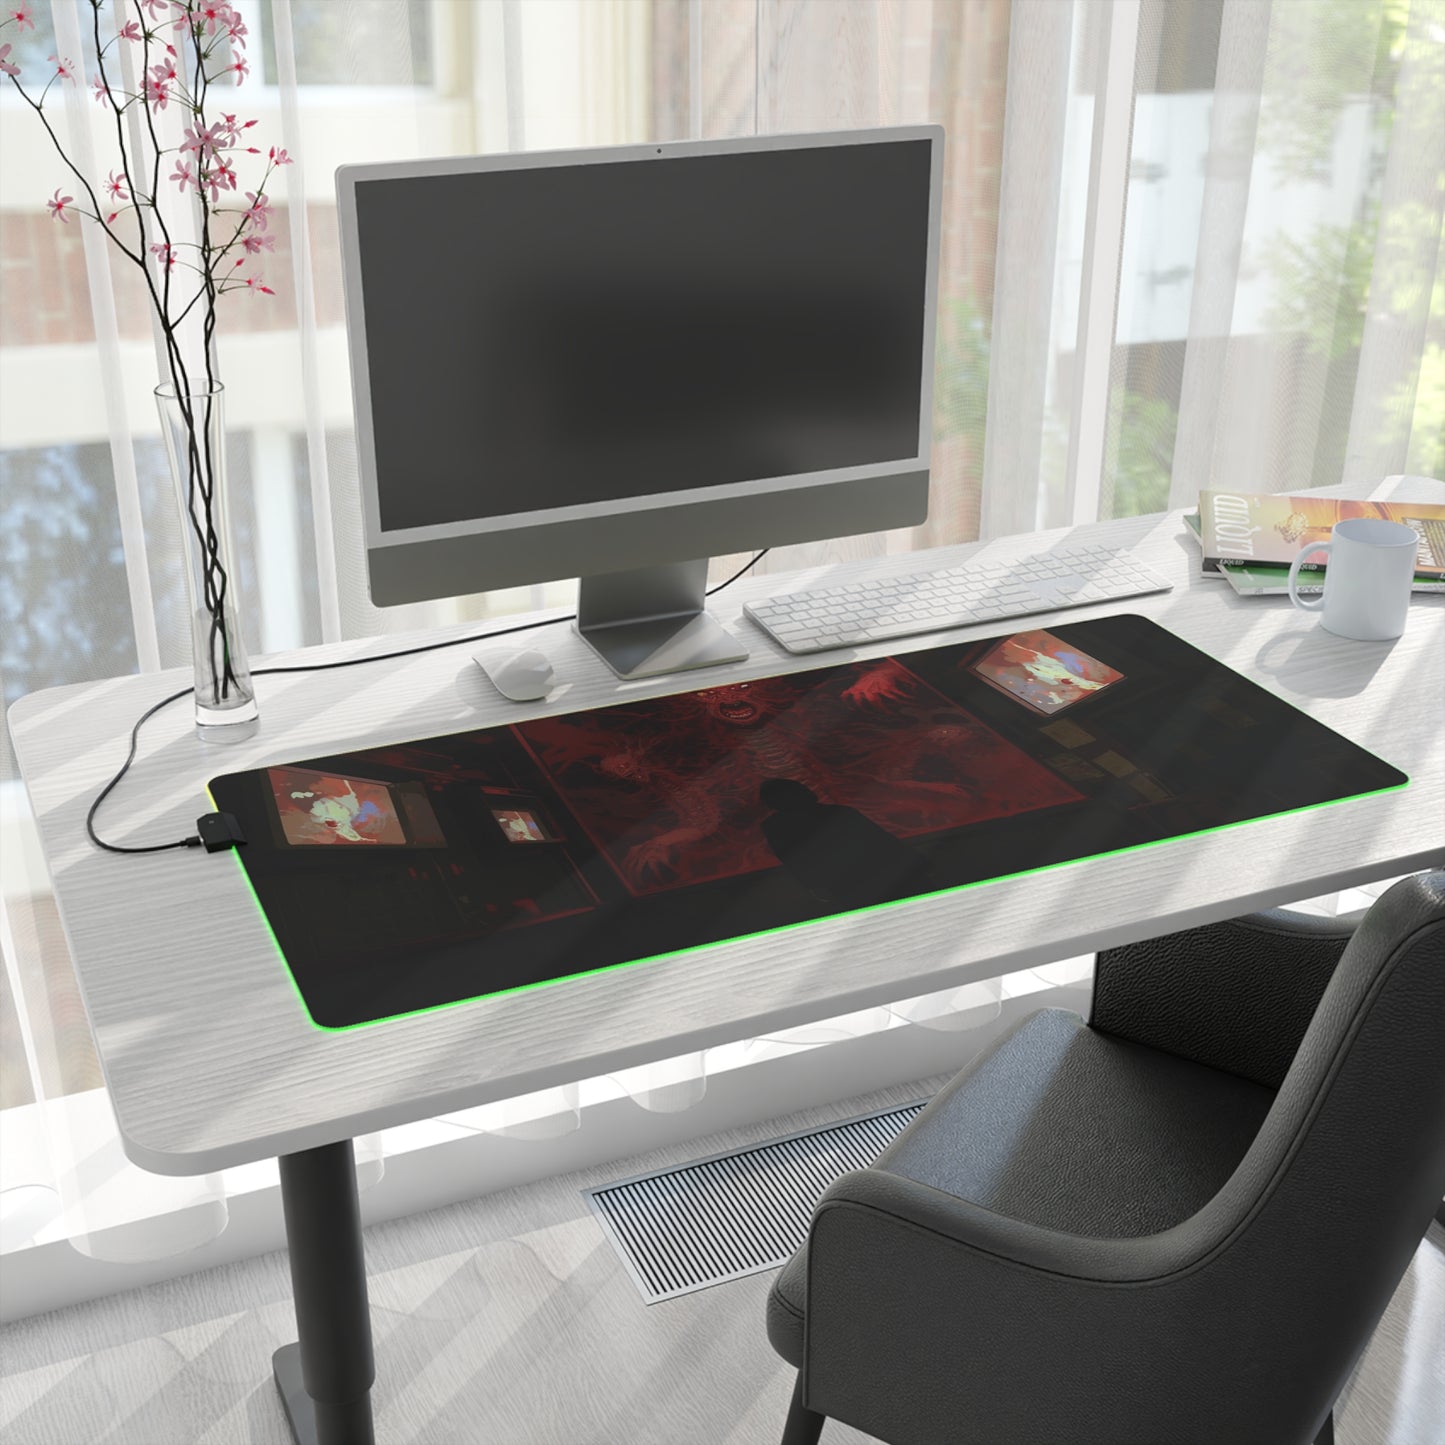 Sealed Horror's LED Gaming Mouse Pad